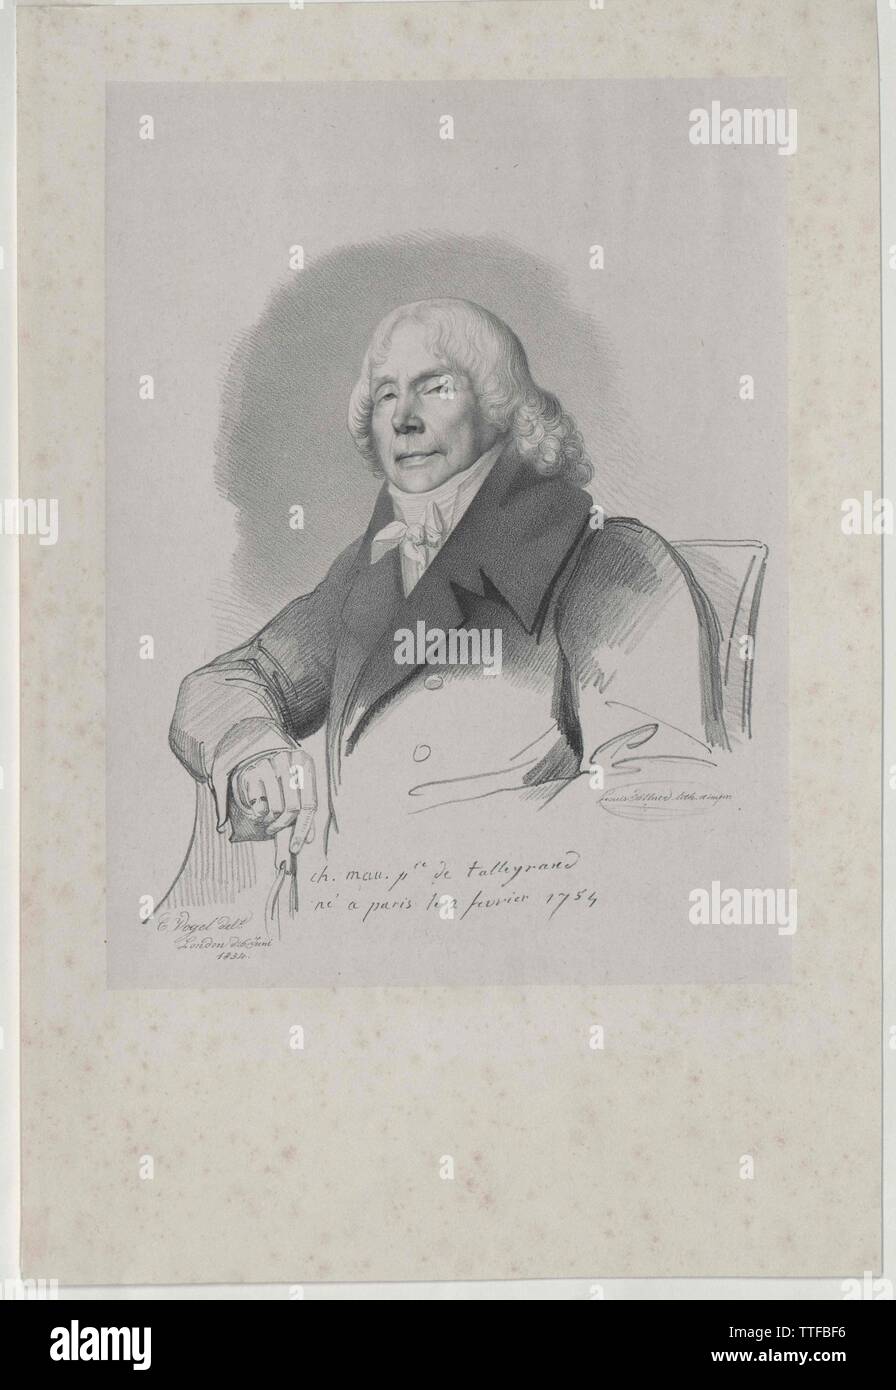 Talleyrand-Perigord, Charles Maurice duke, lithograph by Ludwig Zoellner, Additional-Rights-Clearance-Info-Not-Available Stock Photo